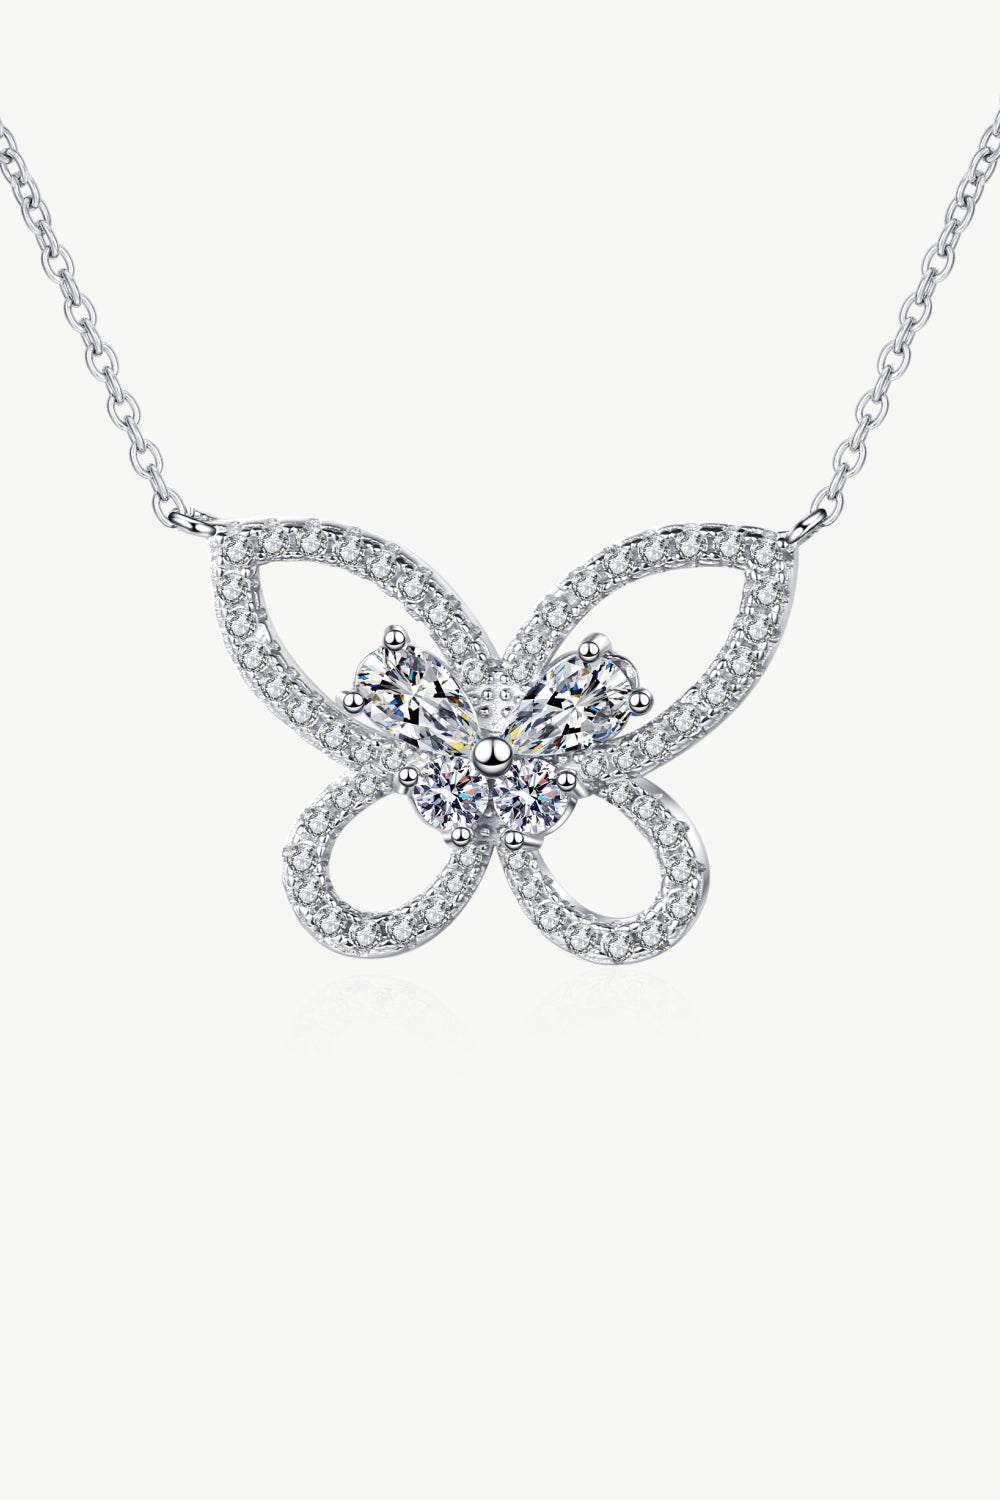 Moissanite Butterfly Pendant Necklace-Necklaces-Inspired by Justeen-Women's Clothing Boutique in Chicago, Illinois